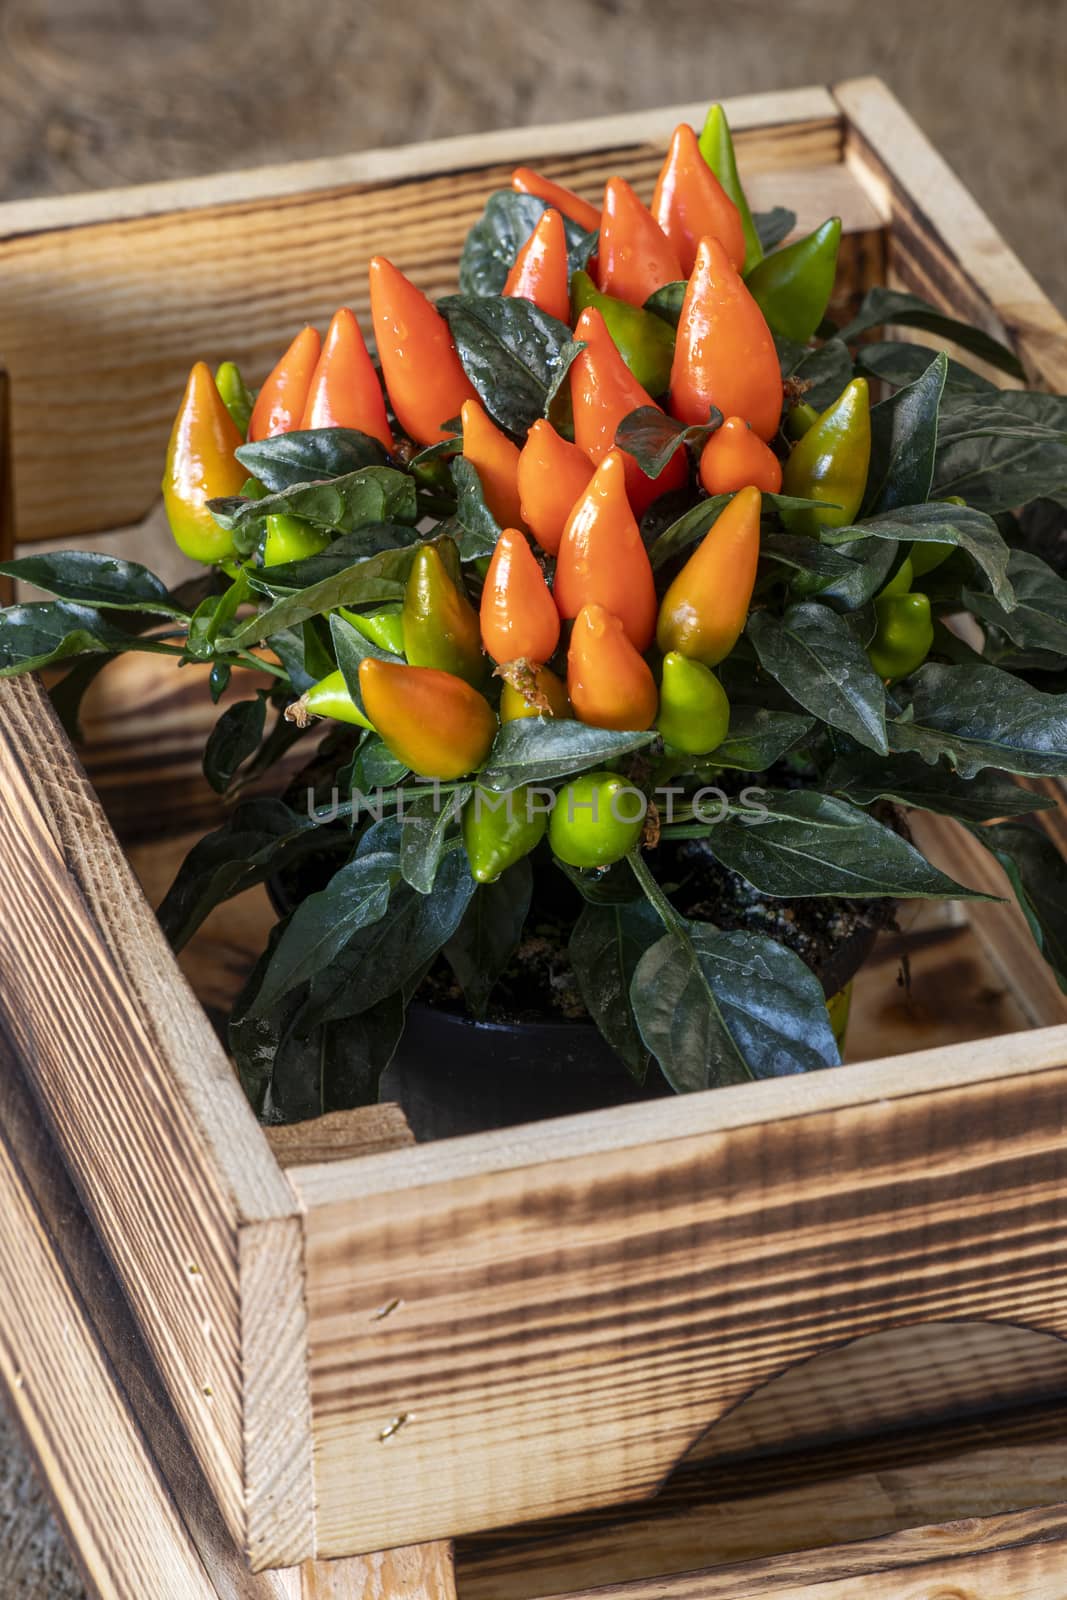 chilis by bernjuer